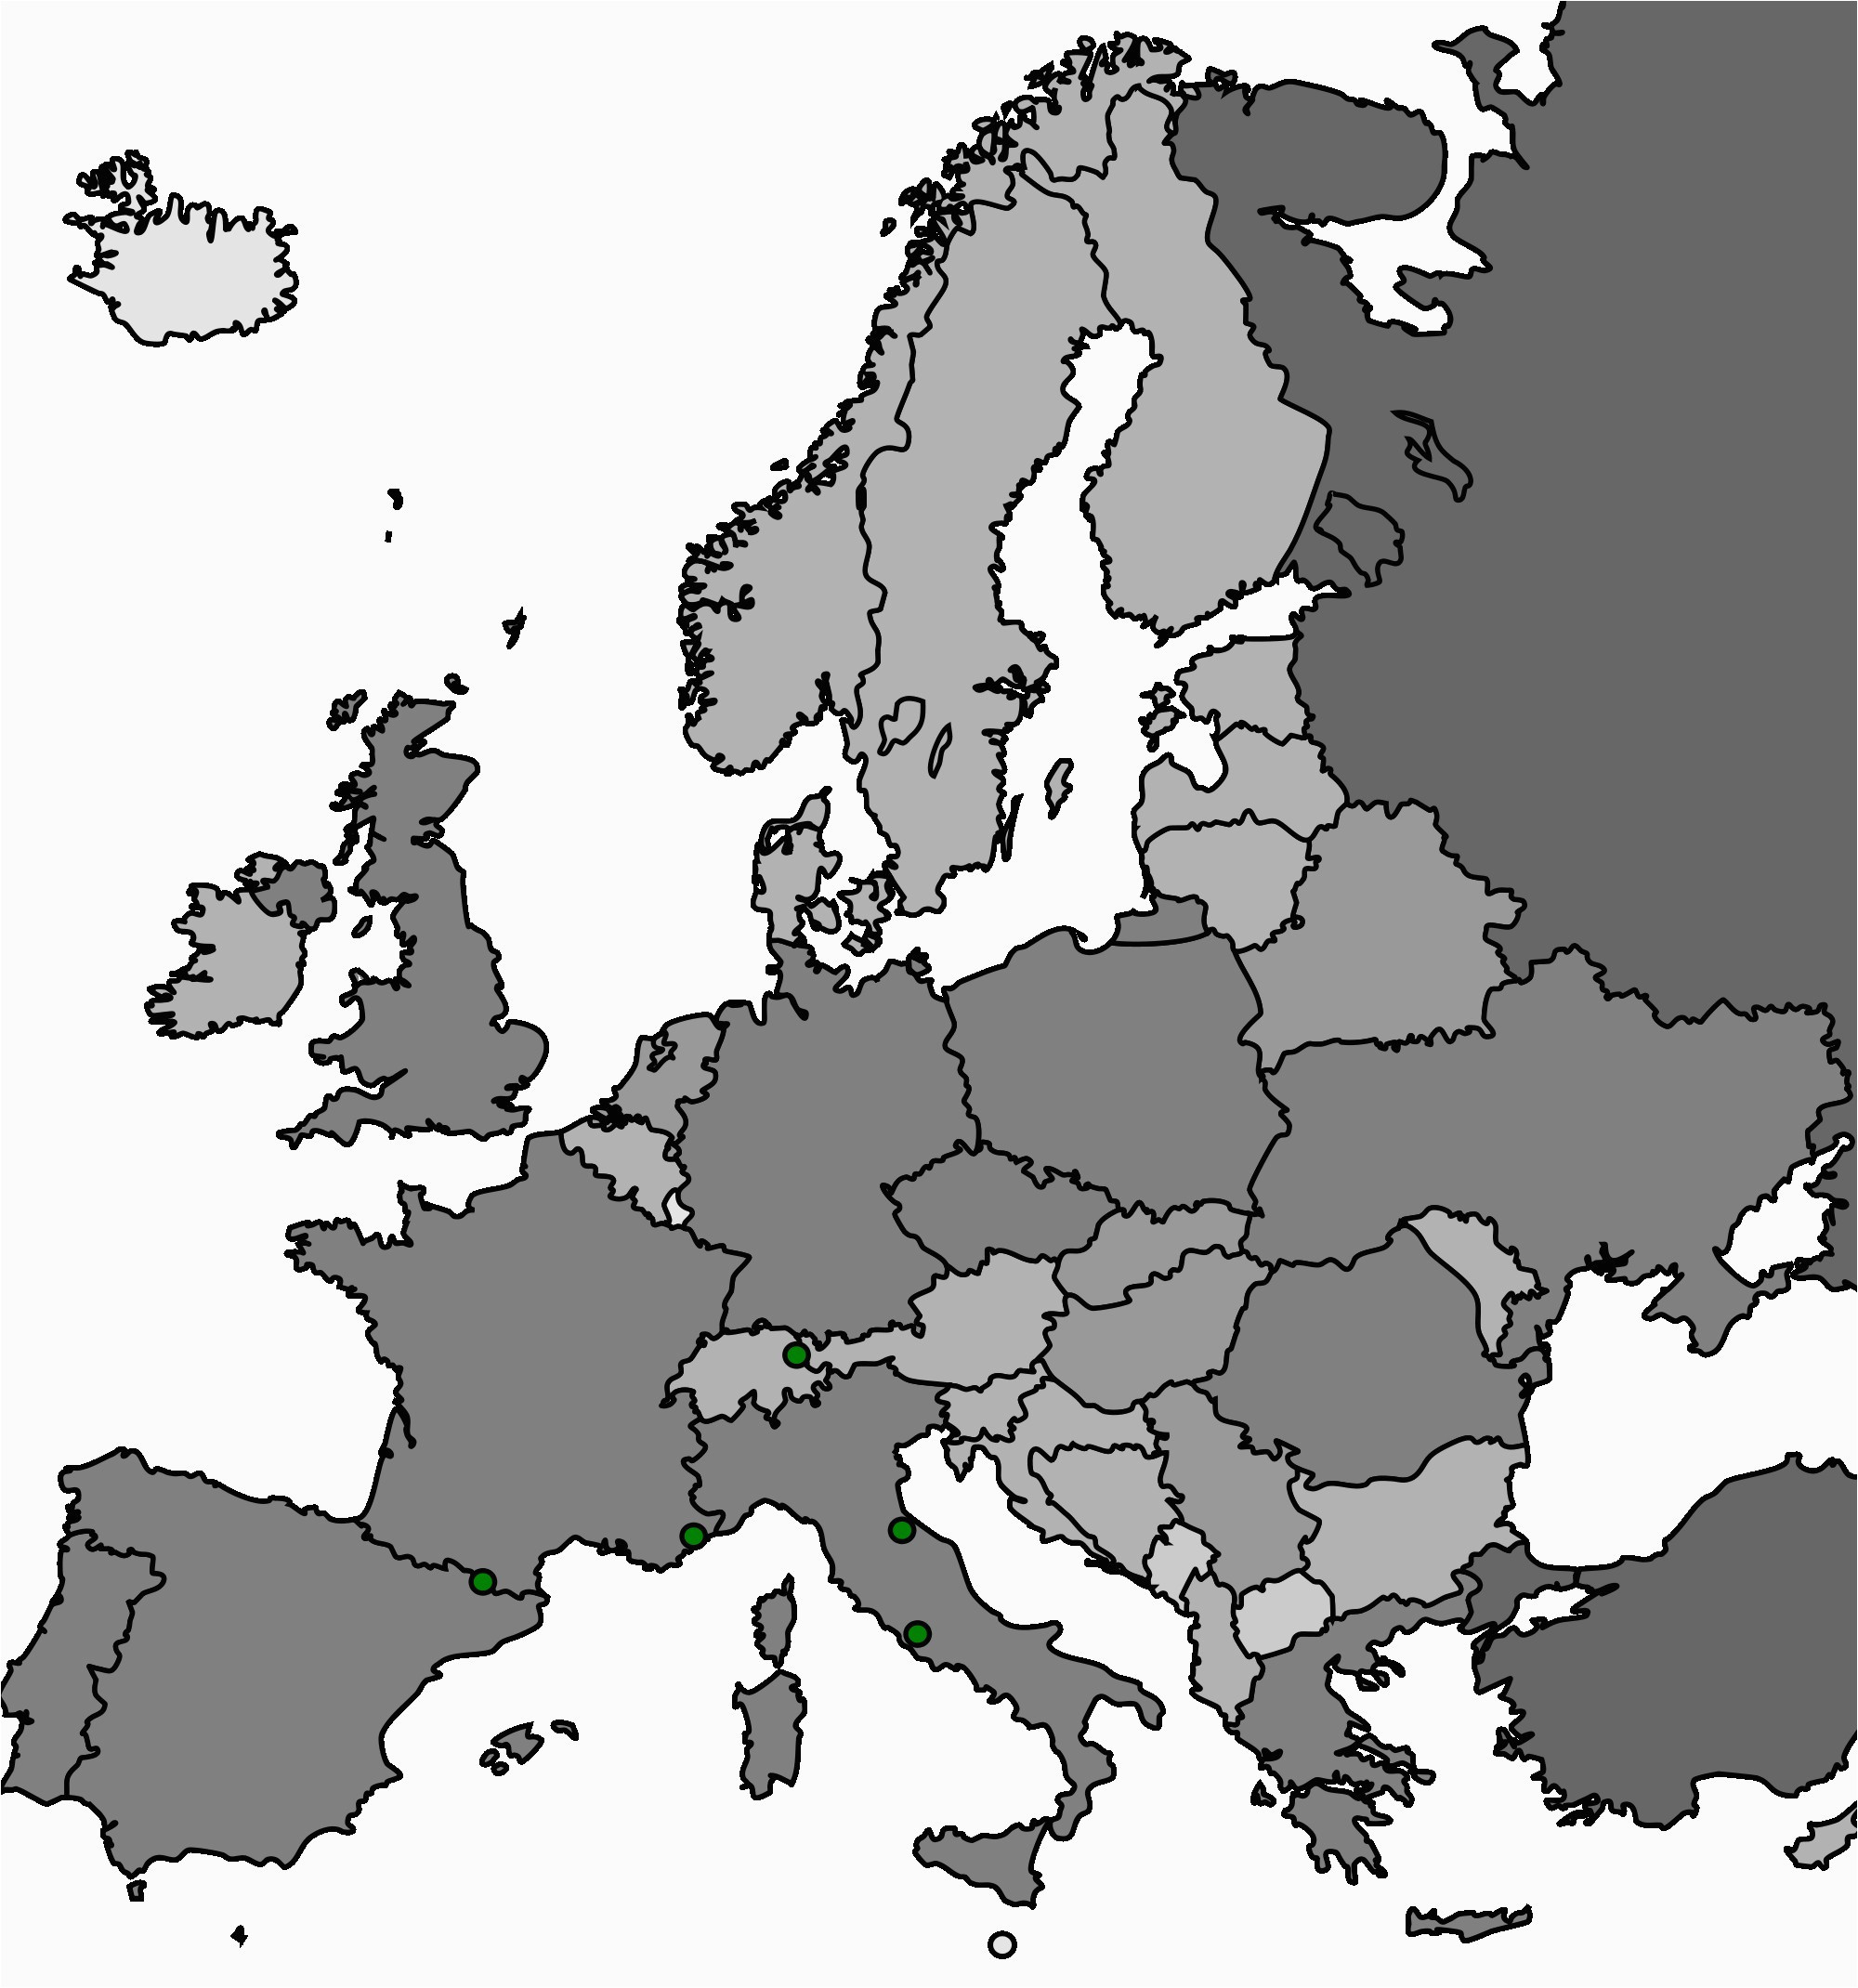 Map Of Europe Without Labels 53 Strict Map Europe No Names Of Map Of Europe Without Labels 